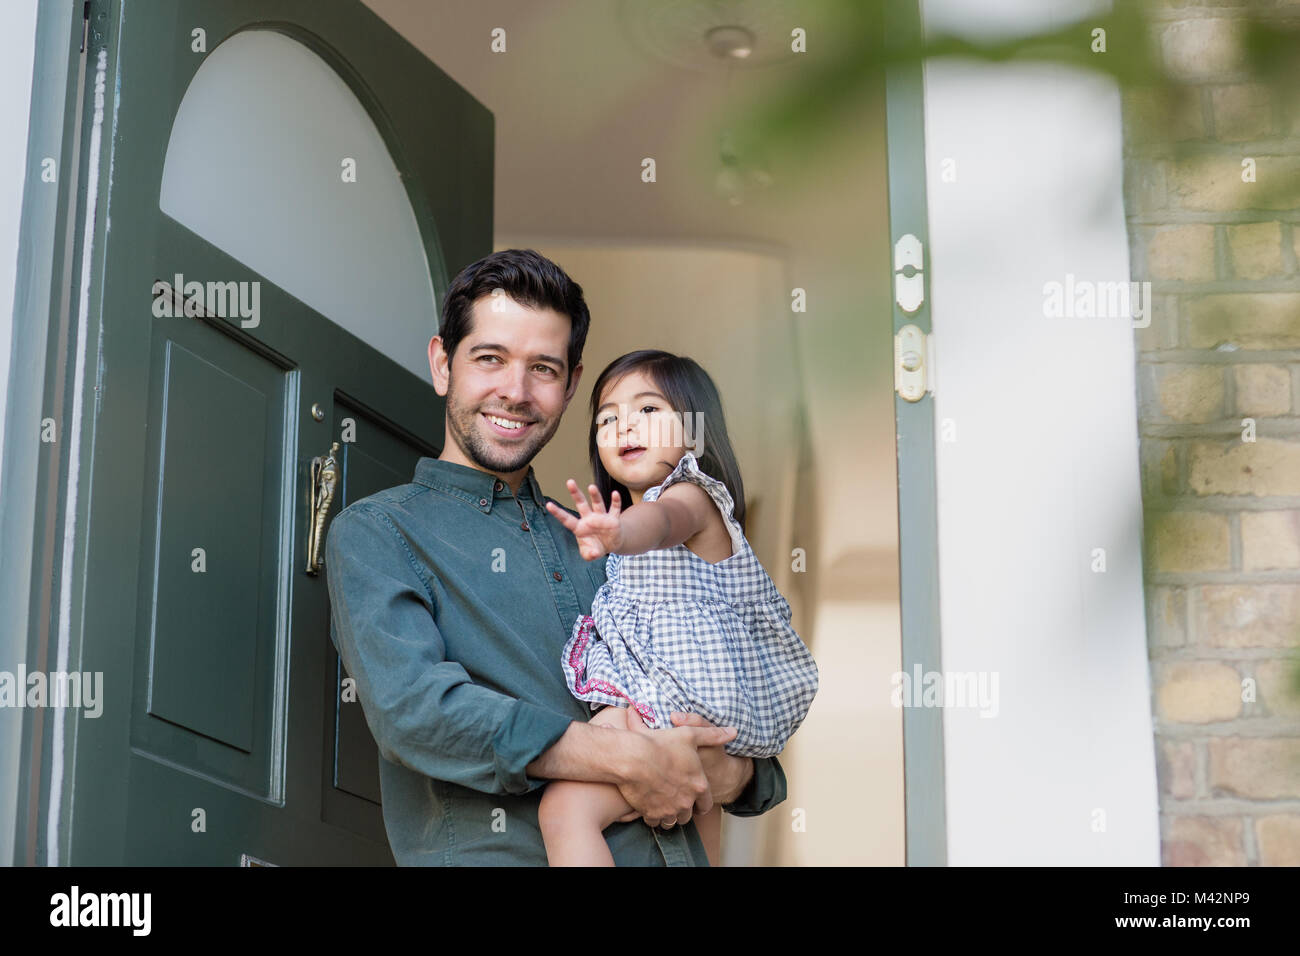 Father standing in home doorway with daughter waving Stock Photo